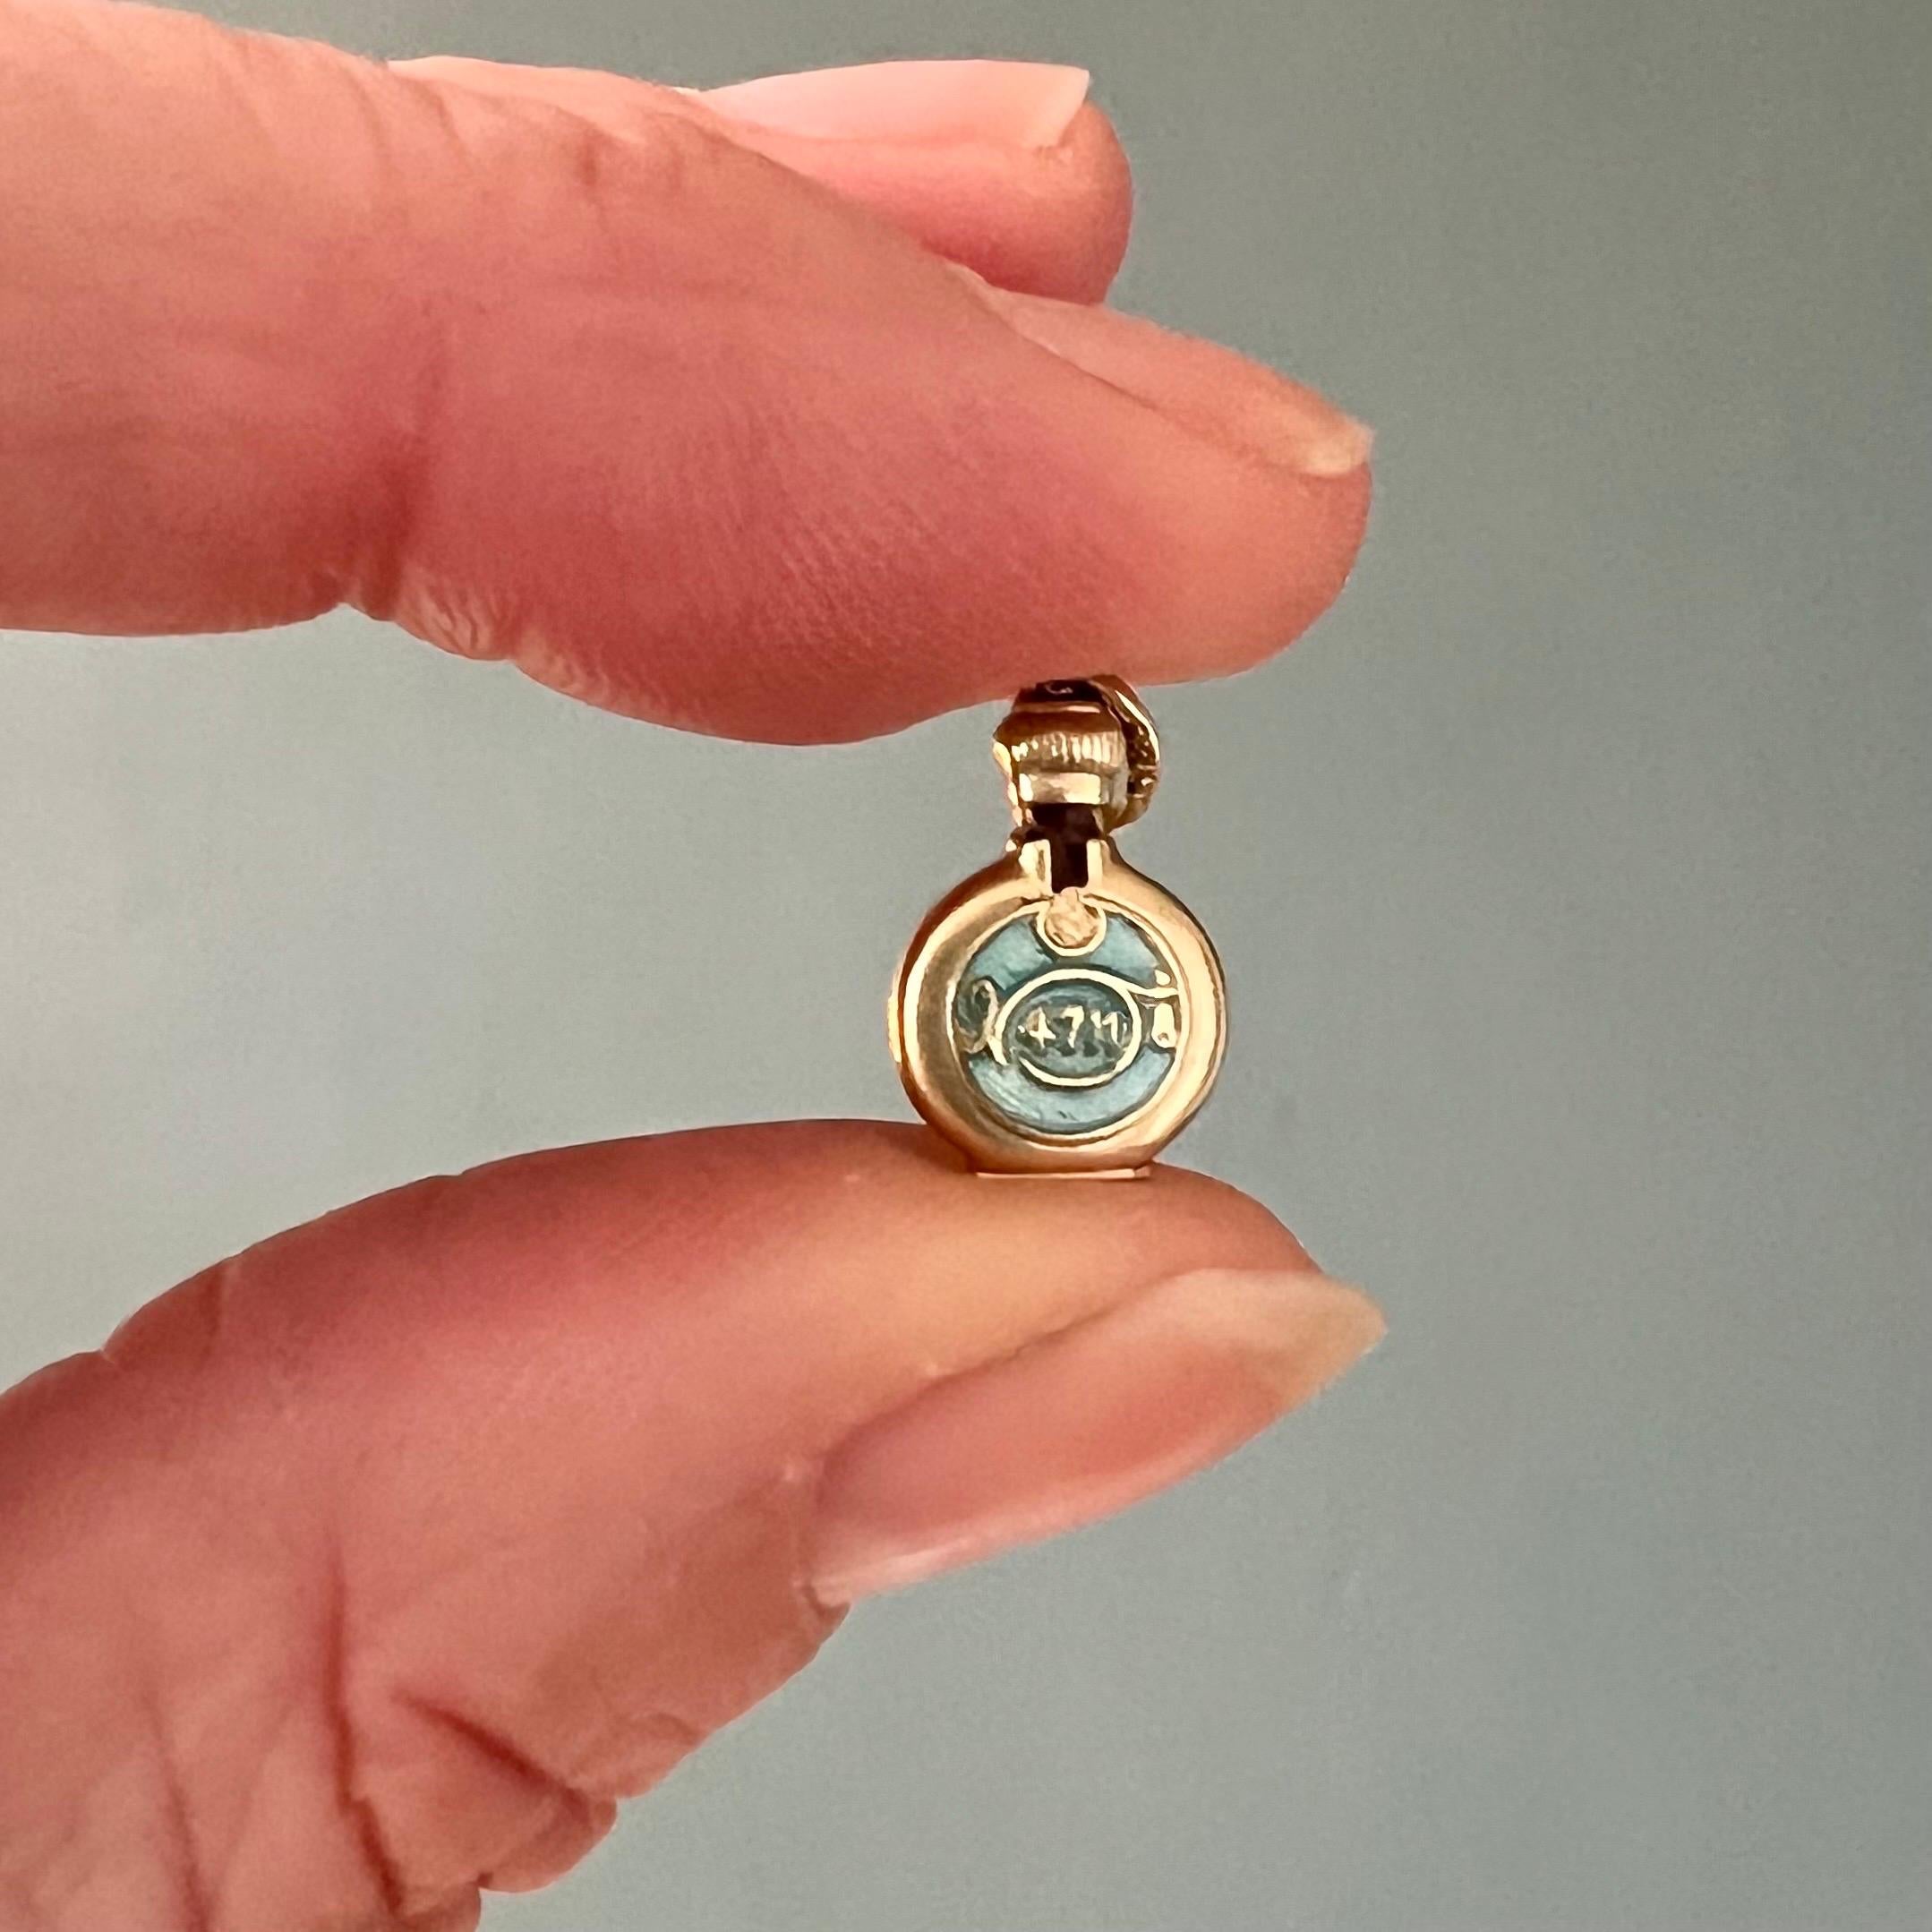 This is a 14 karat yellow gold vintage eau de cologne 4711 bottle charm pendant. 4711 is an aromatic citrus fragrance for women and men. The charm is beautifully crafted in gold and turquoise enamel.

Fun fact, the name 4711 refers to the house